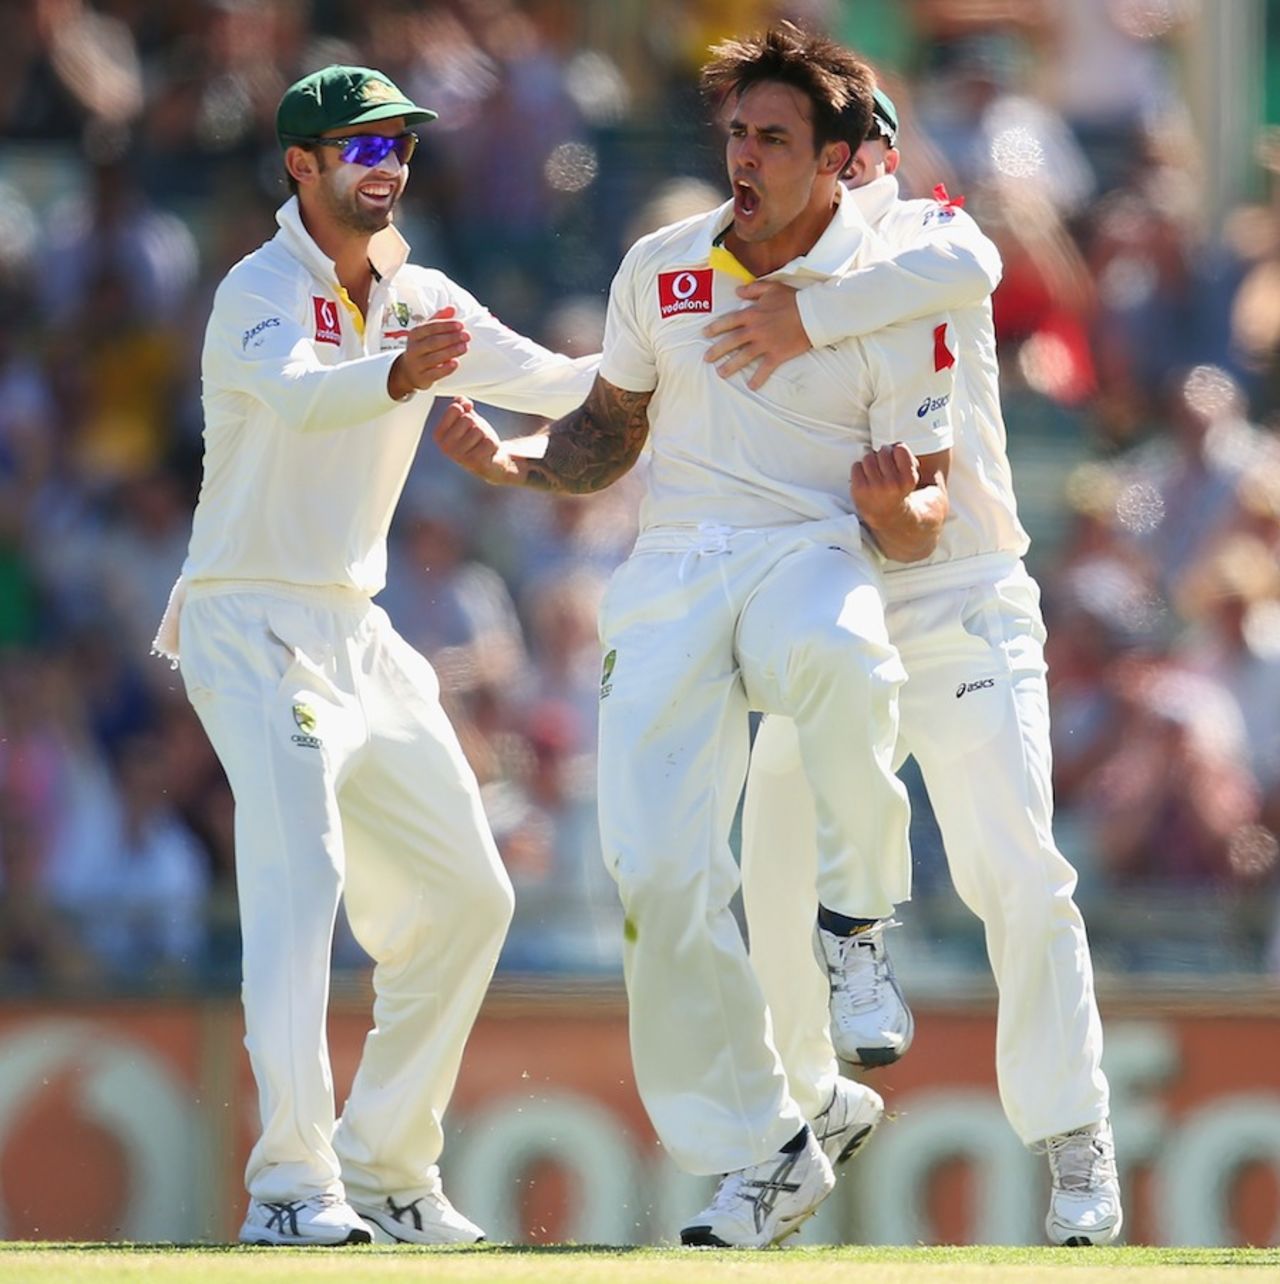 Mitchell Johnson celebrates after catching Alviro Petersen, Australia v South Africa, 3rd Test, 2nd day, Perth, December 1, 2012